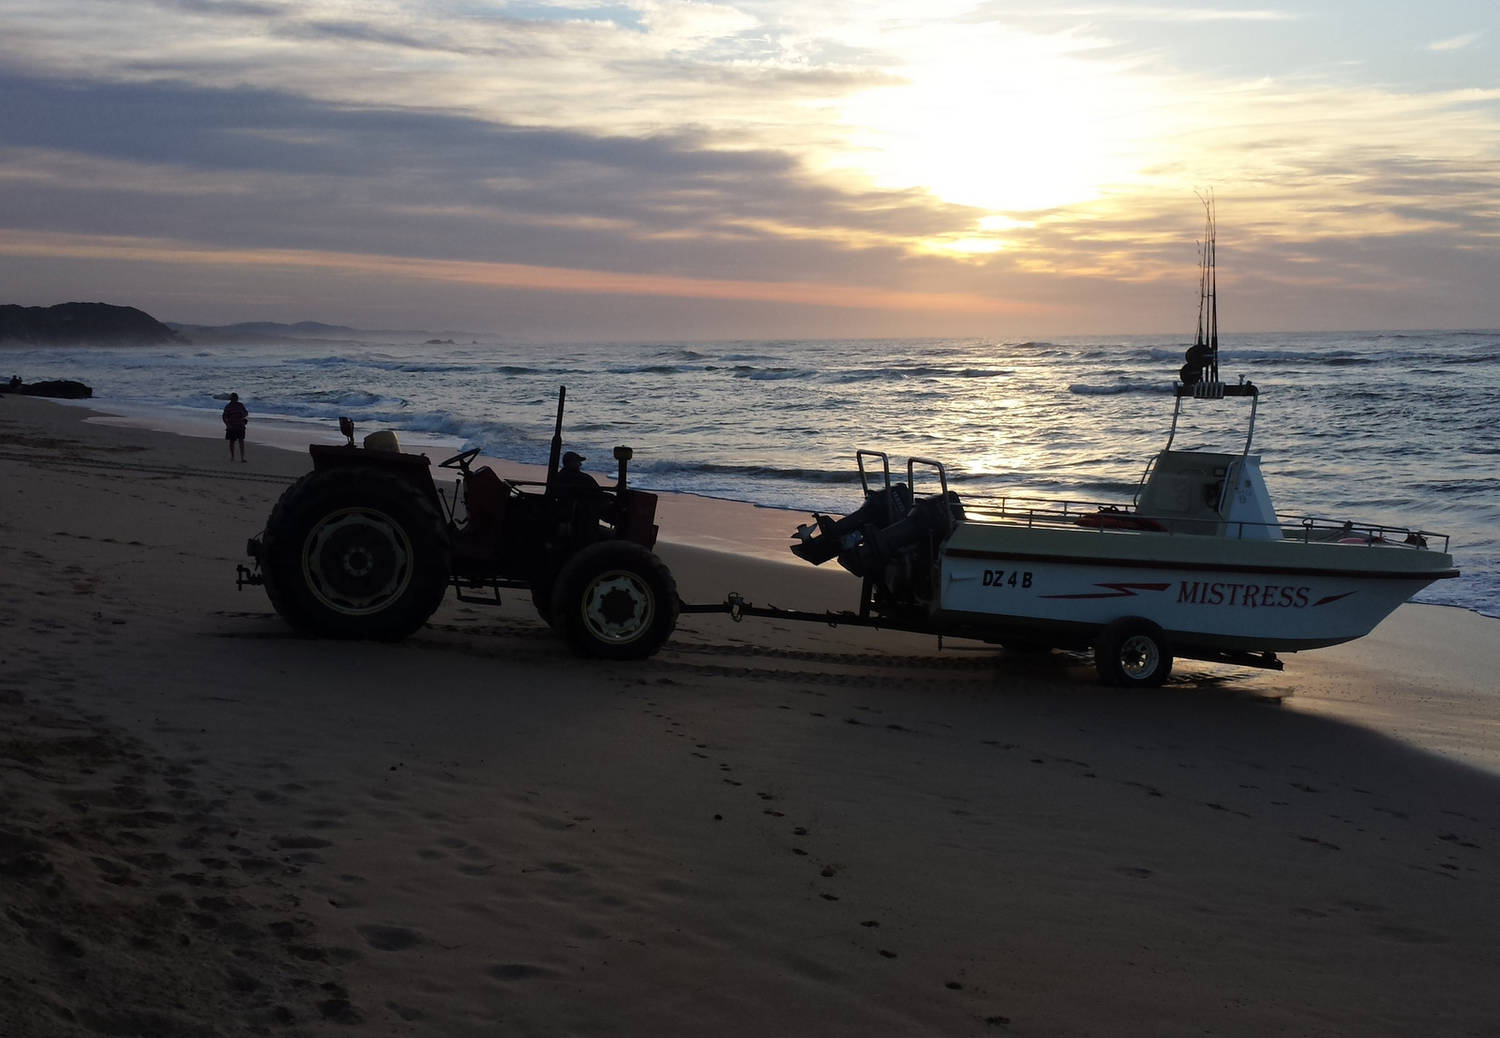 A photograph of a boat being towed on a beach near the sea shore at sunrise